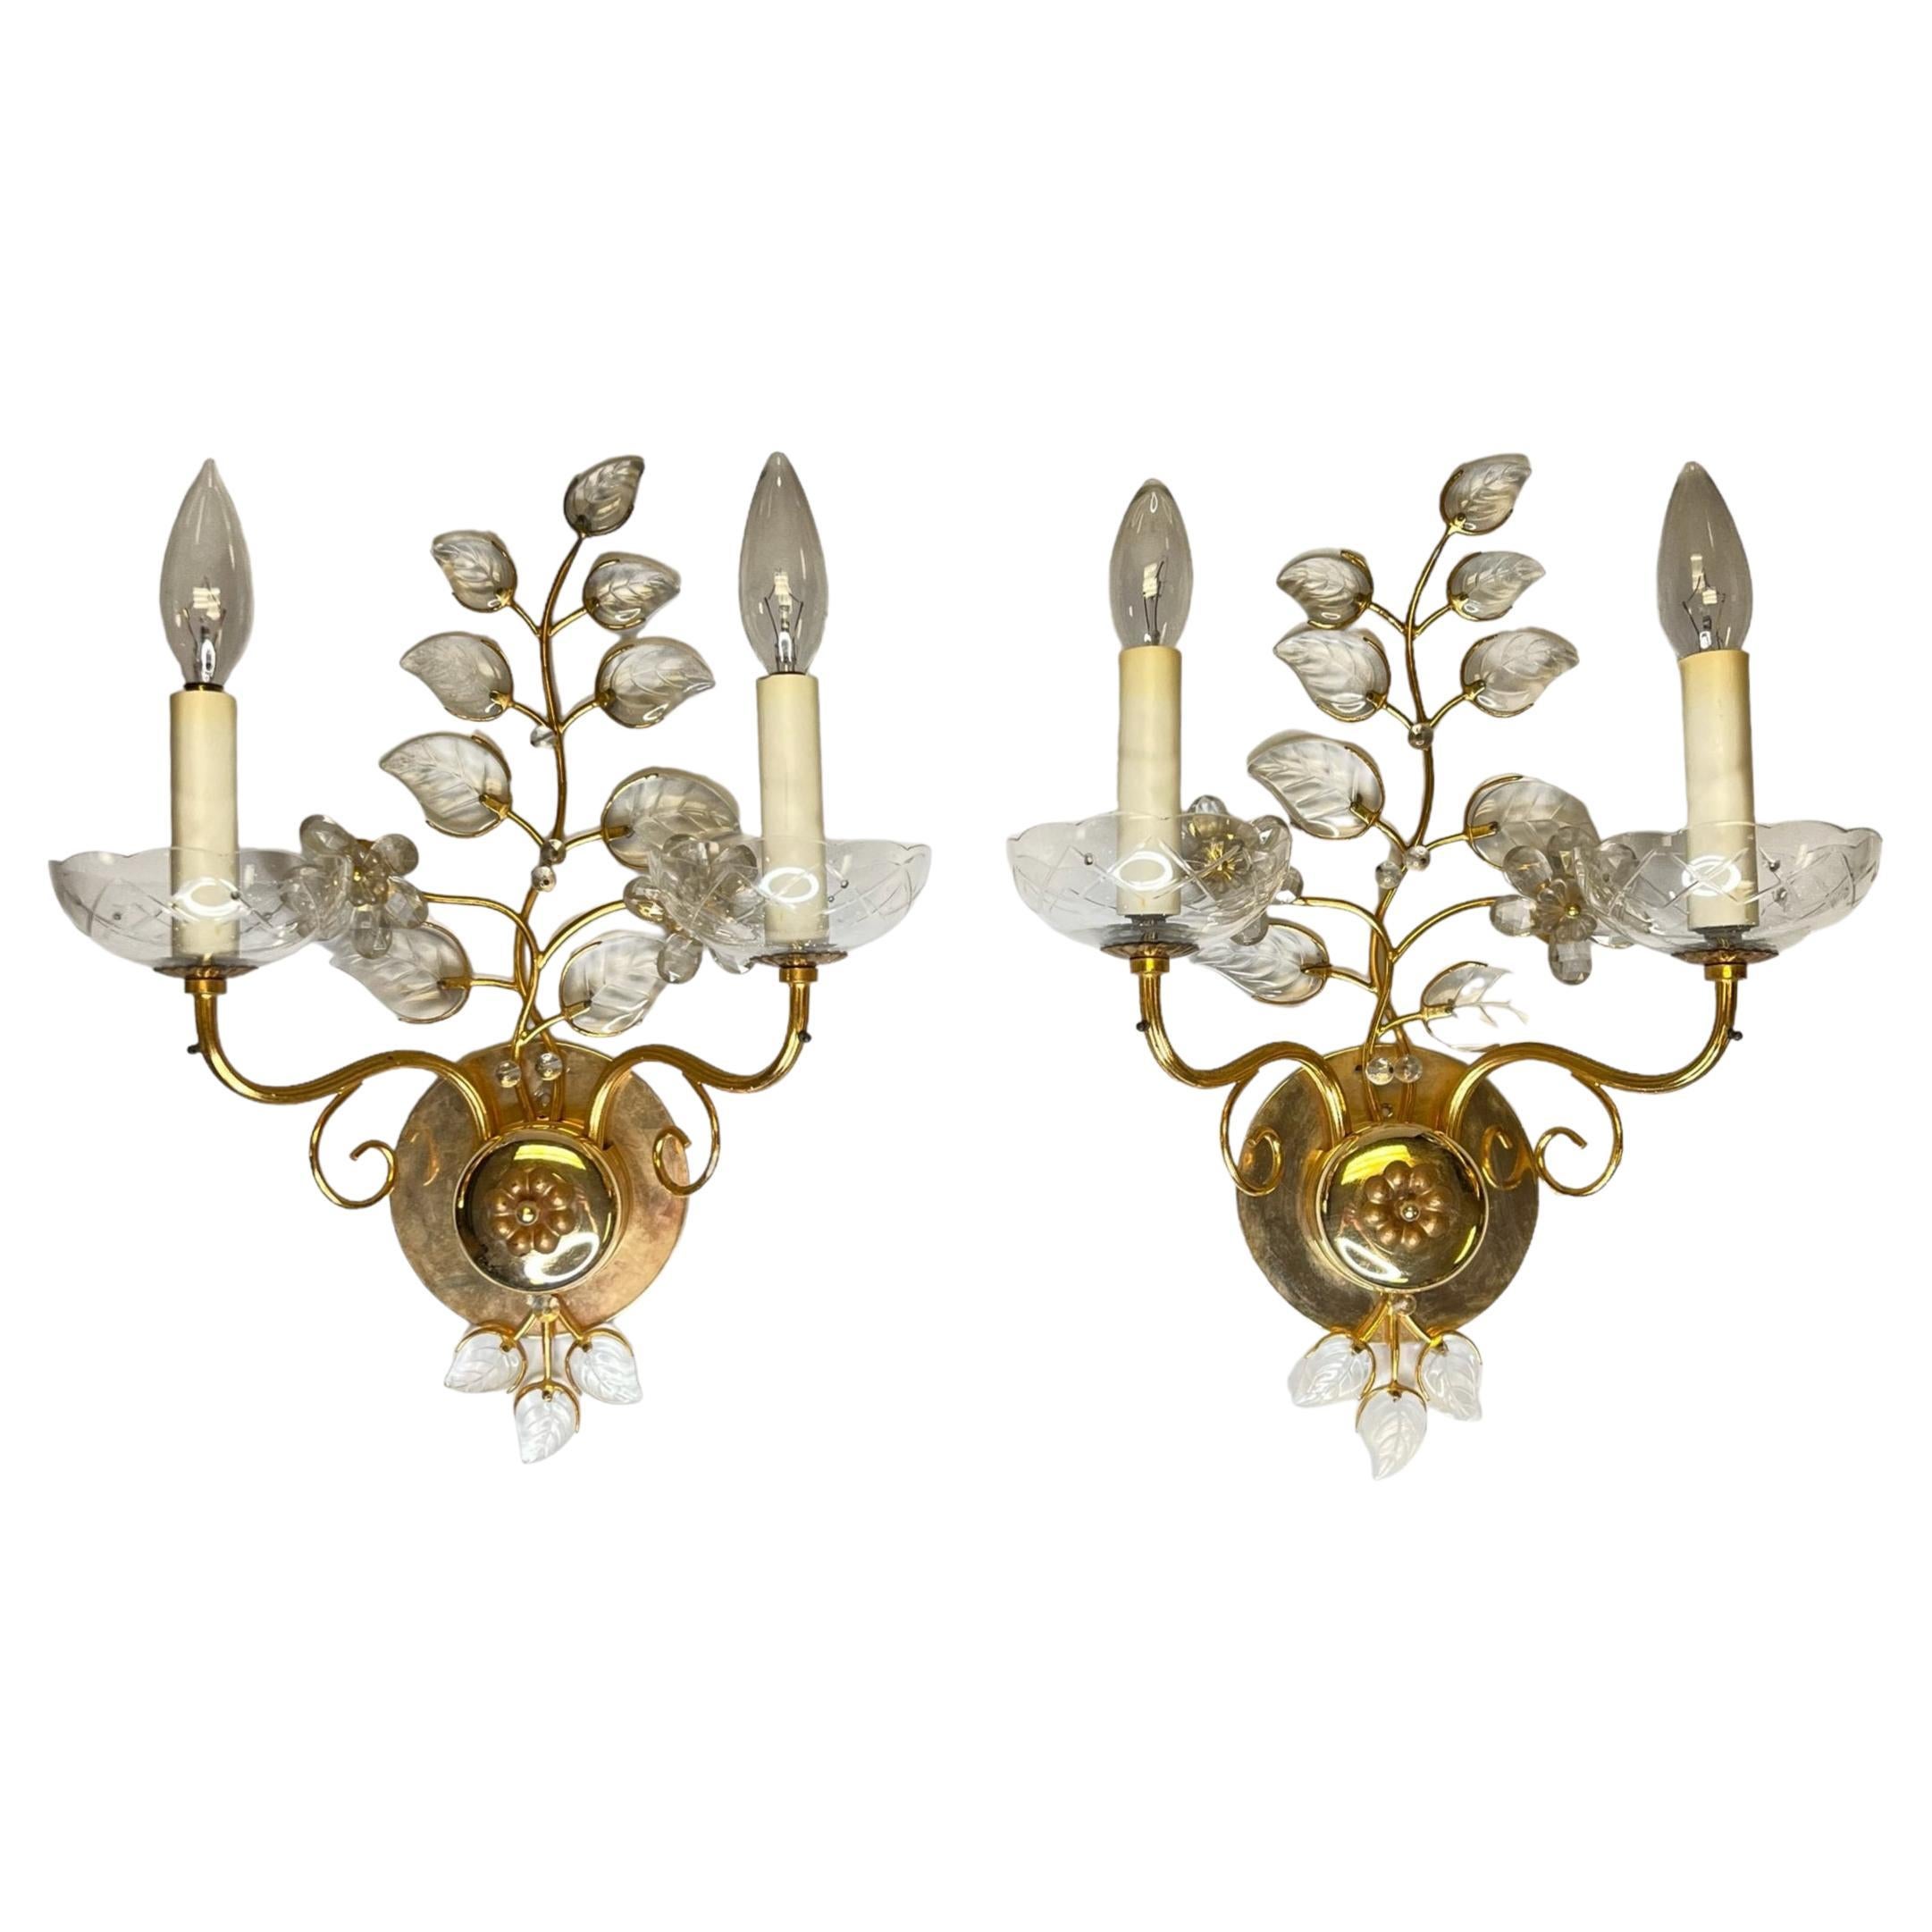 Pair of Maison Baguès Style Gilt Brass and Glass Sconces